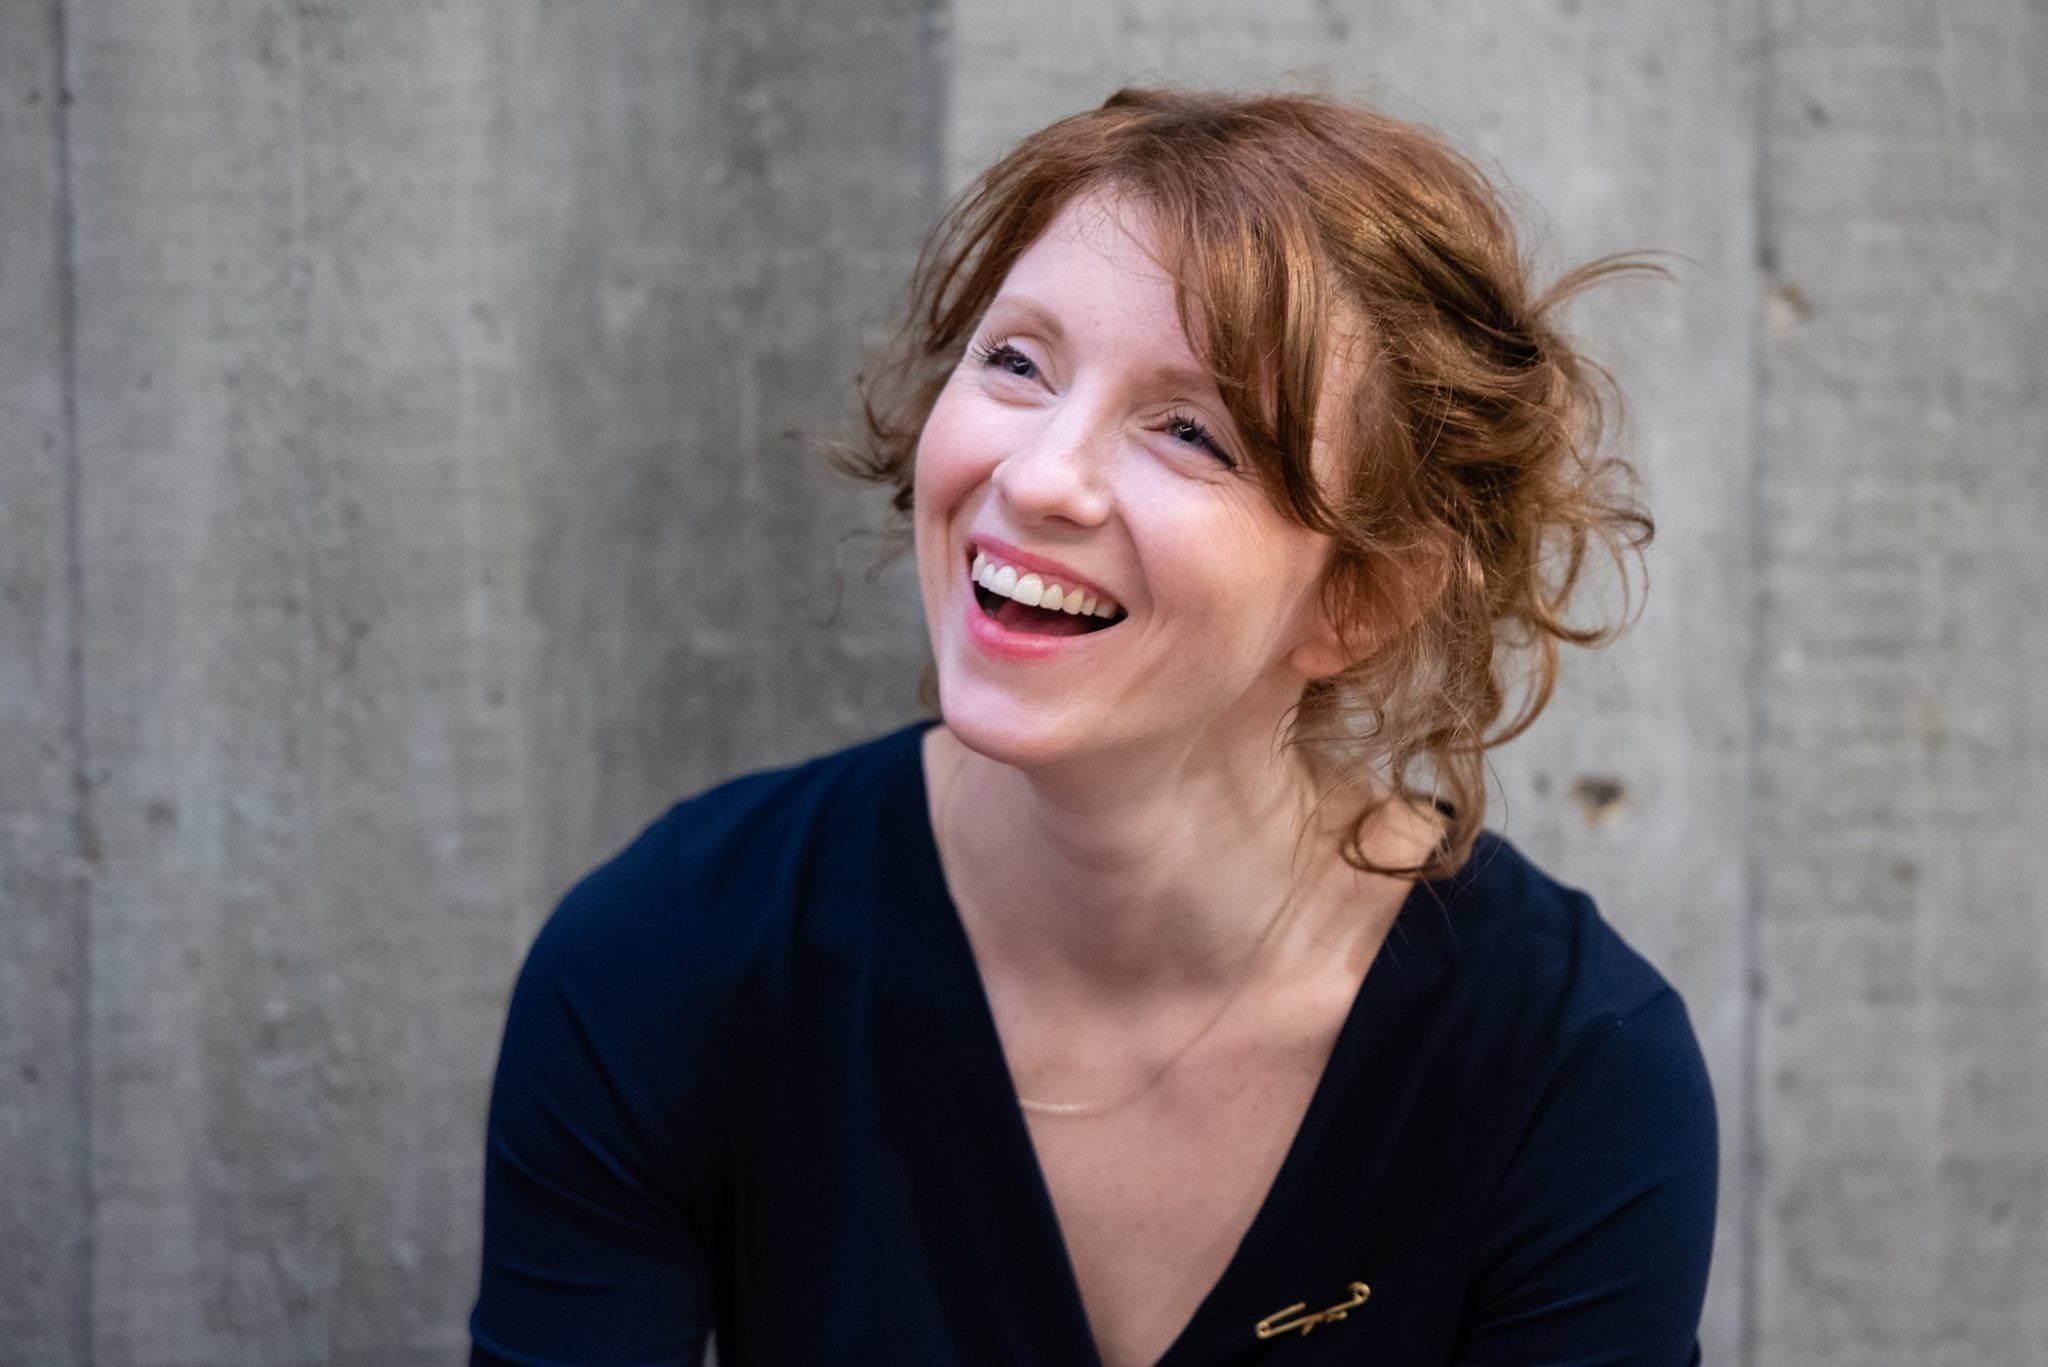 Forward Prize winner Liz Berry is to perform at StAnza 2019